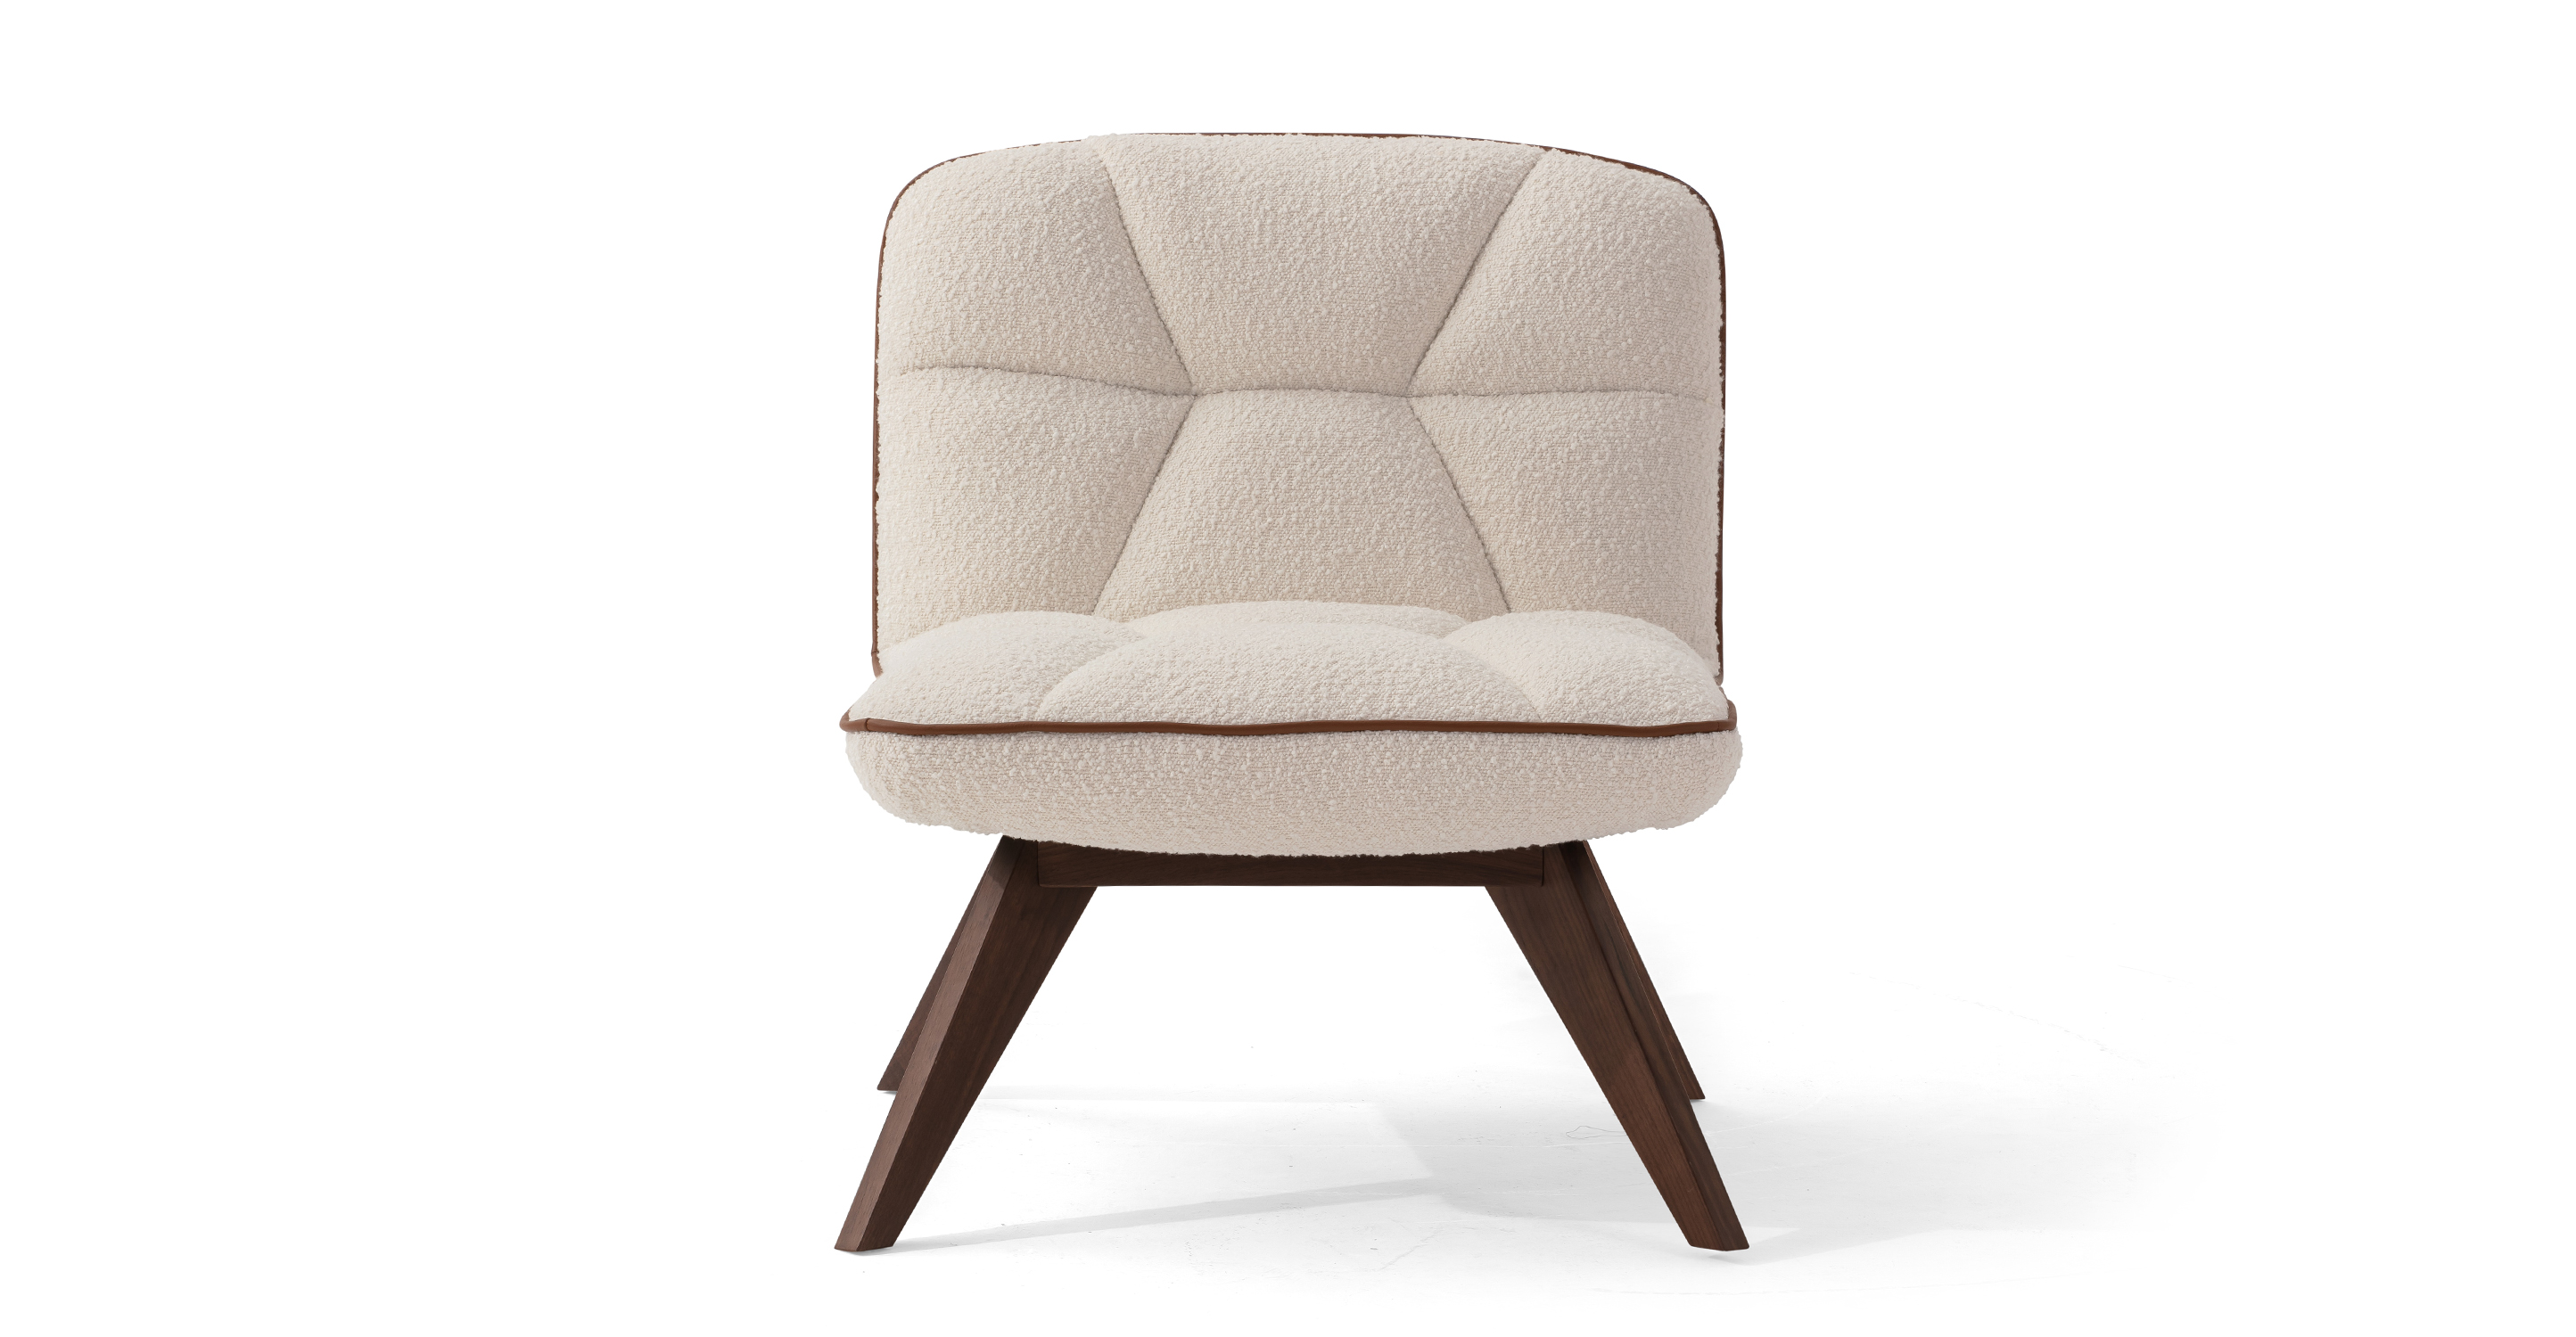 The Buckie is a modern chair in white textured fabric. The chair is covered in tufted upholstery from backrest to the seat. The Buckie is an armless chair. The wooden legs are all turned outwards to the floor for a more stability. (Facing front)